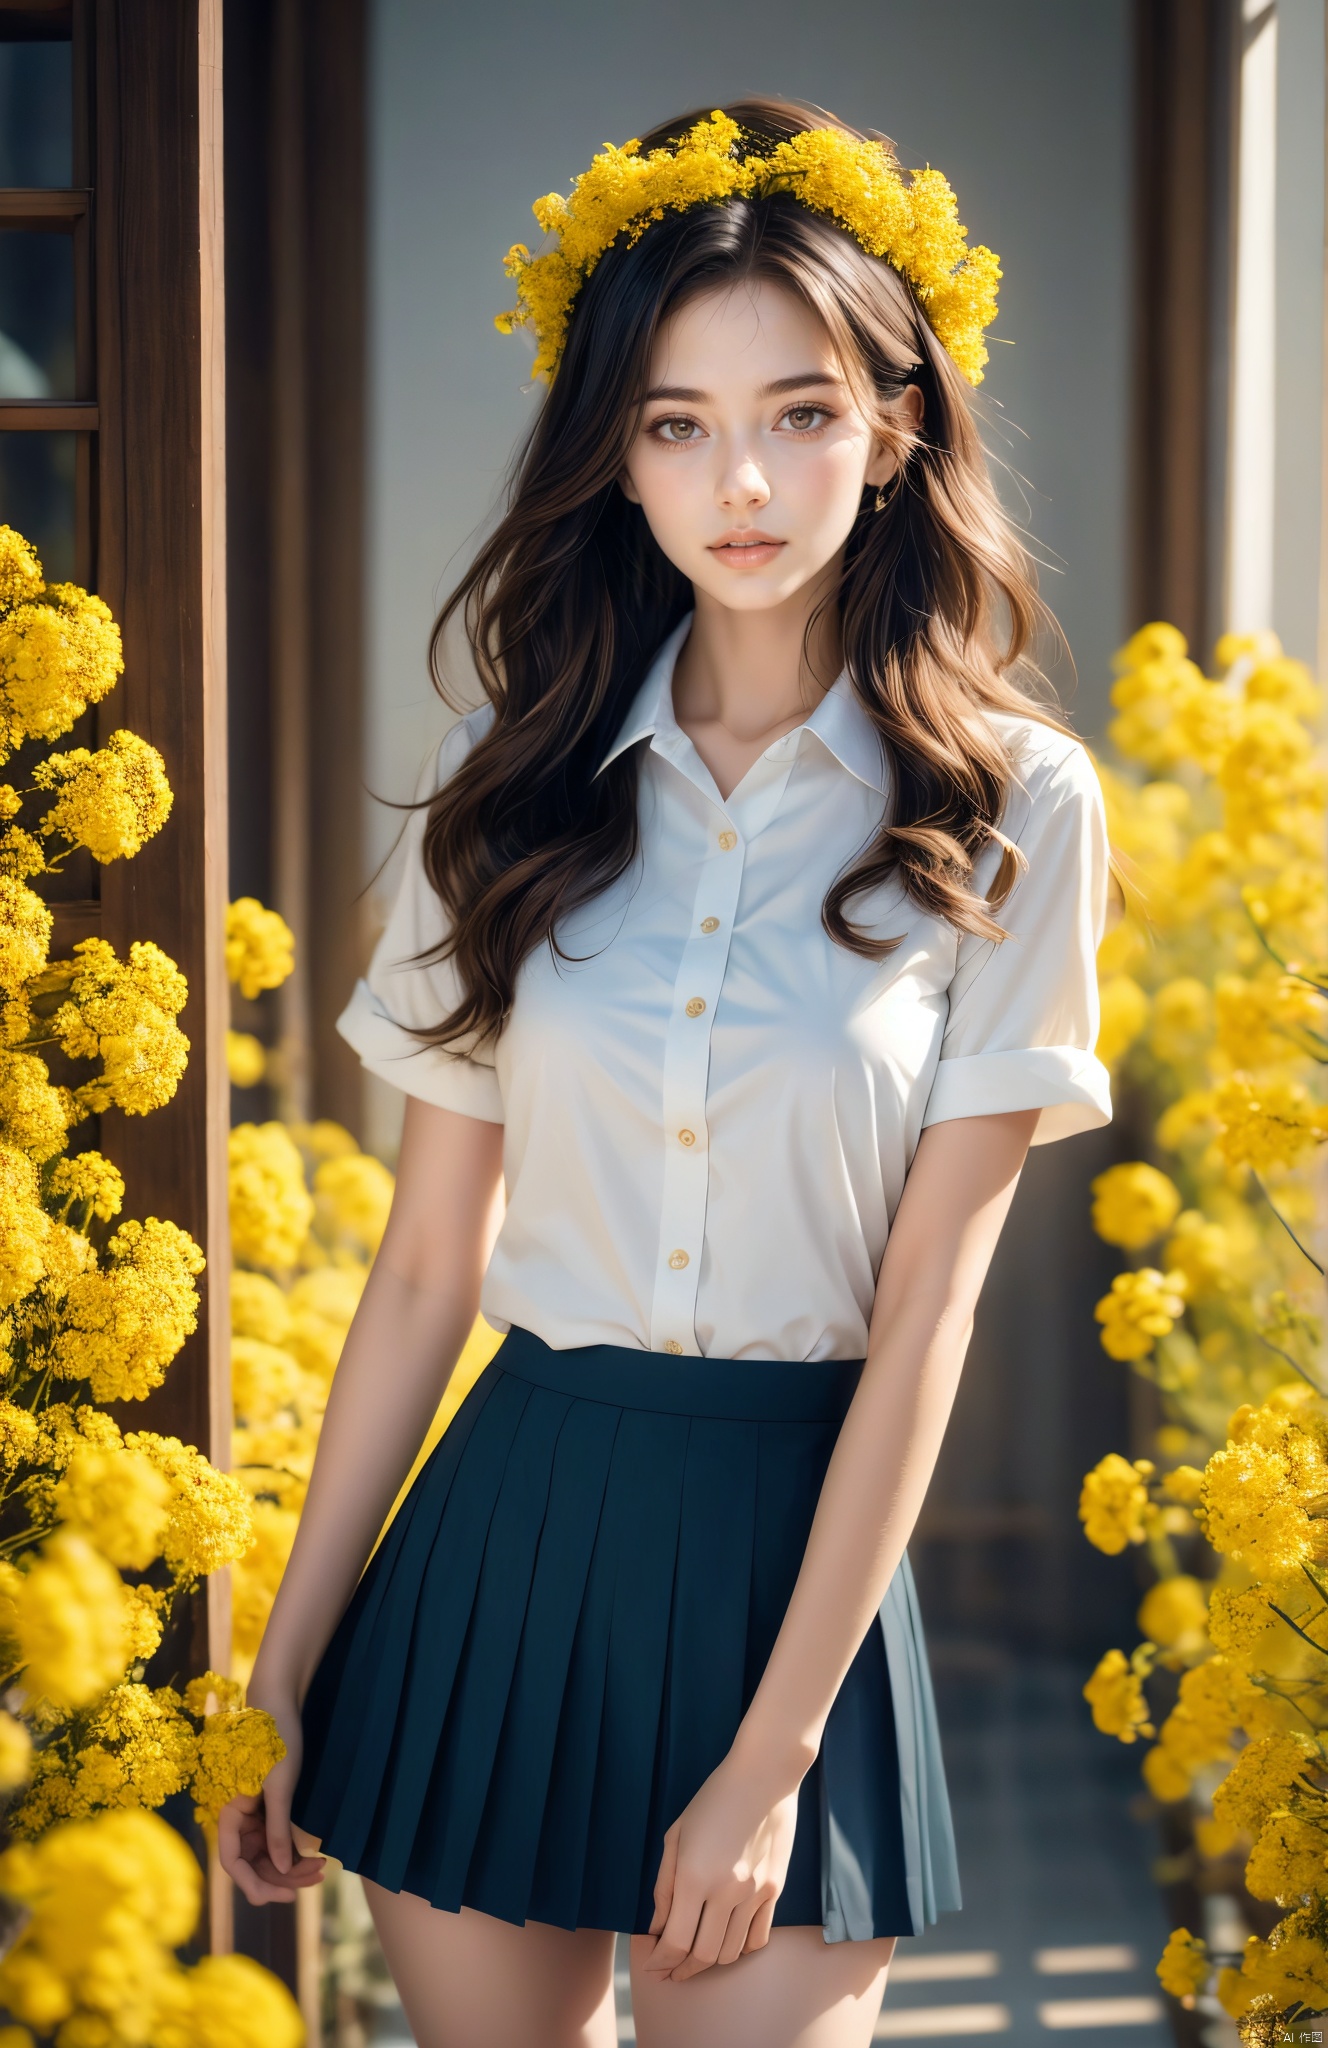 A pretty young girl was in a room, dressed in a JK uniform and short skirt, showing off her long legs, sexy, bare breasts, medium breasts, with a wreath on her head and a bunch of bright yellow canola flowers in her hand. The background is solid black with cinema-quality lighting. Sharp focus, high resolution photos of the world's most beautiful artwork, a young girl in a JK uniform holding rape flowers in an indoor setting with cinematographic lighting, shot by Greg Rutkowski, popular on ArtStation, intricate, high detail, sharp focus, dramatic, realistic painting art., tutututu